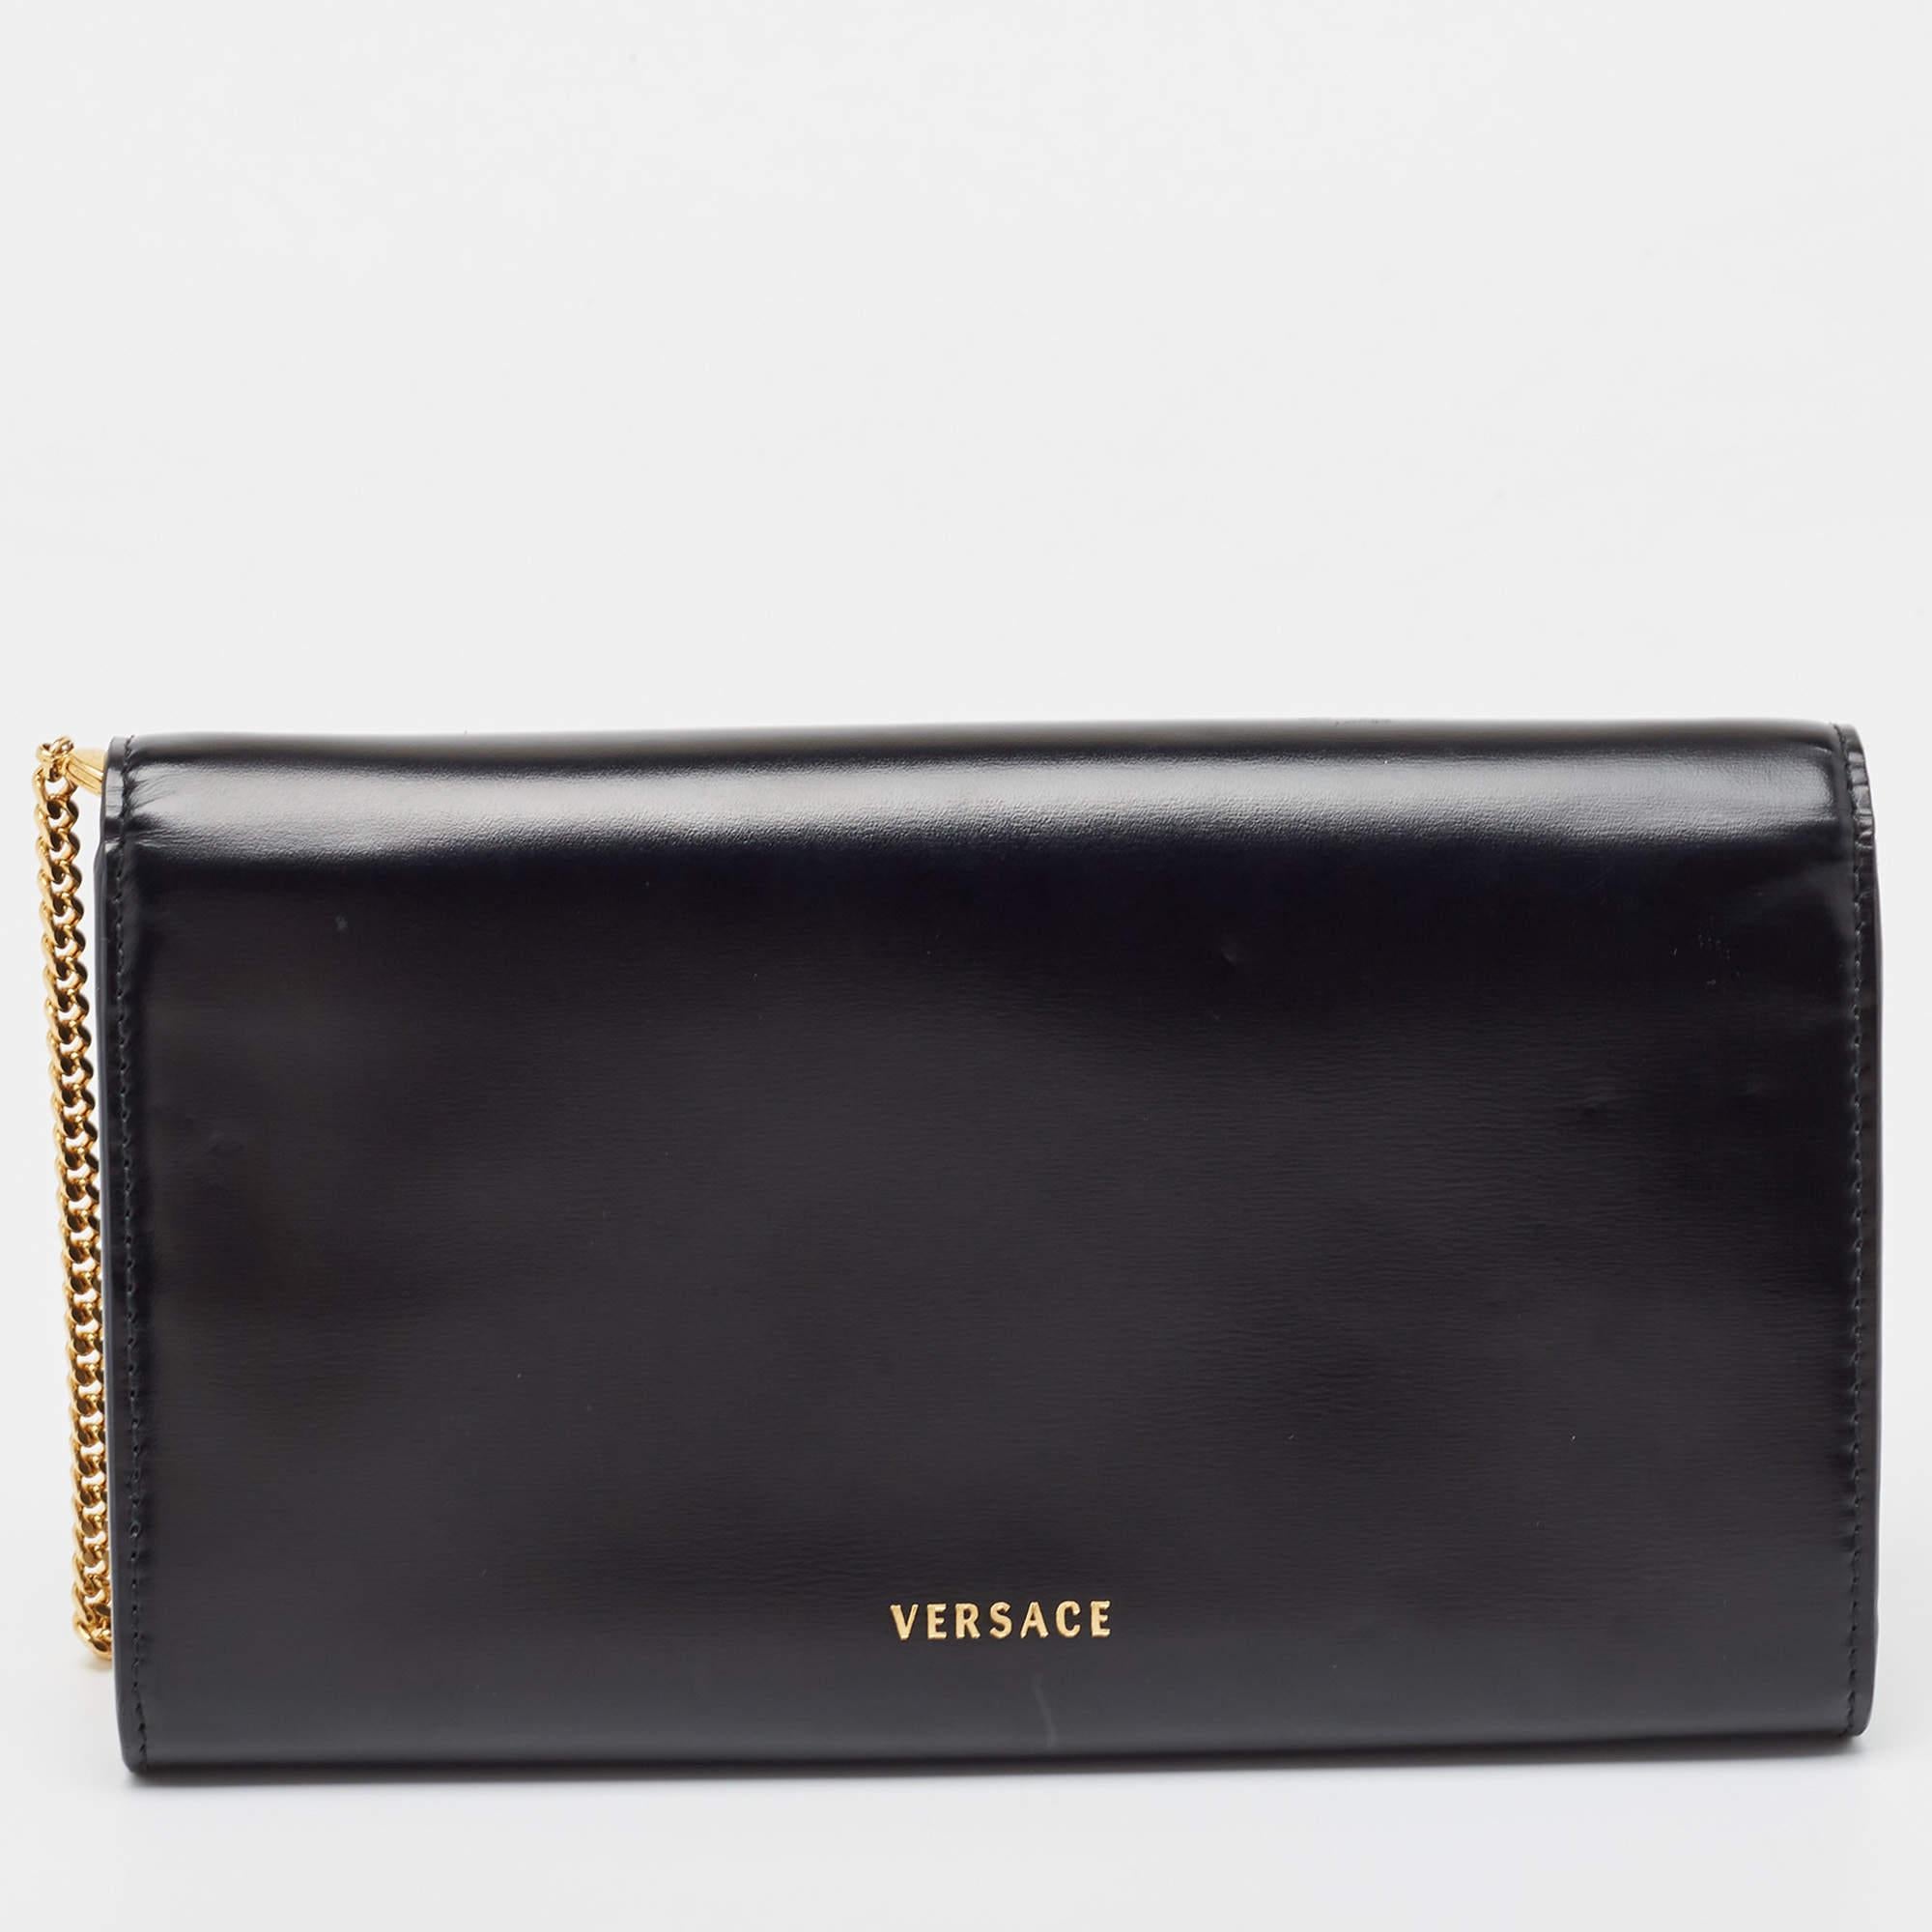 Functional and fashionable, this clutch is a classy styling choice. It is crafted from quality materials, and its lined interior will keep your evening essentials in a neat way.

Includes: Original Box, Brand Dustbag, Detachable Chain Strap